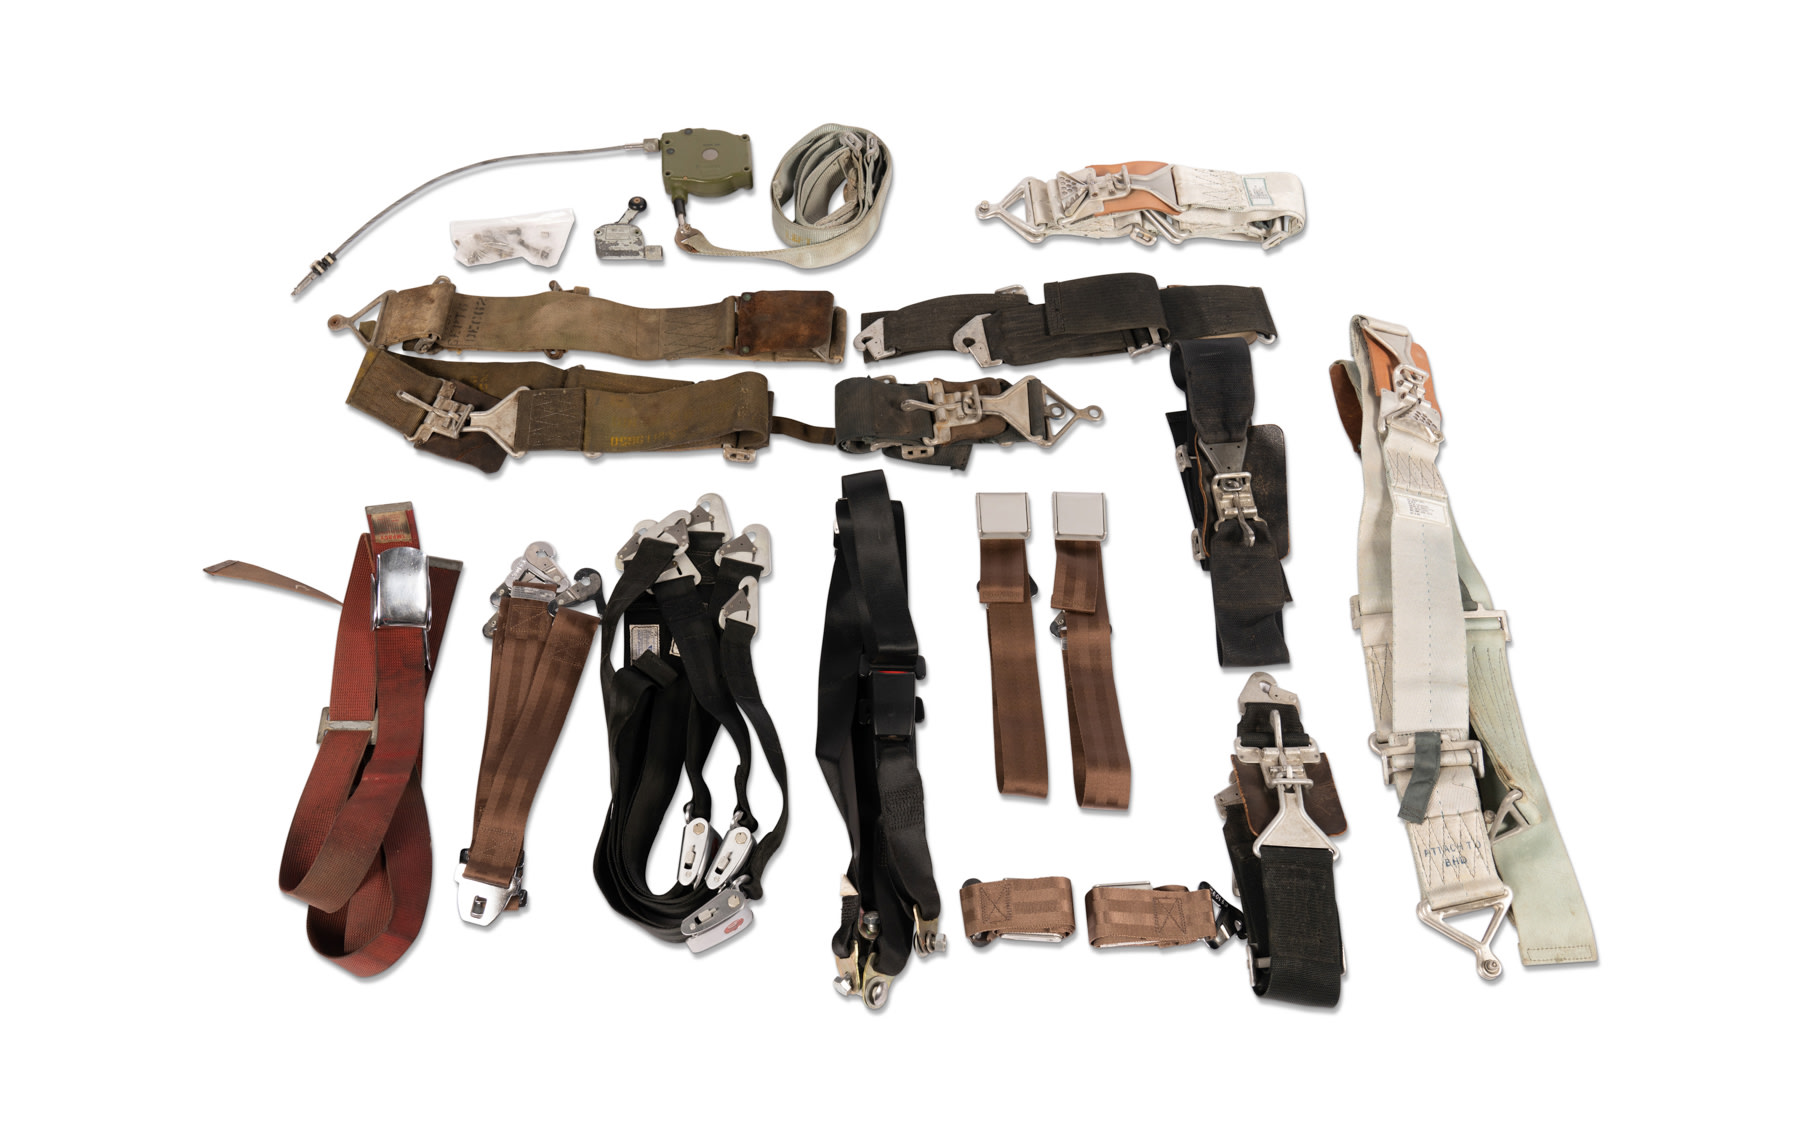 Assorted Vintage Seat Belts, Mainly Aircraft Style, c. 1950s-1960s